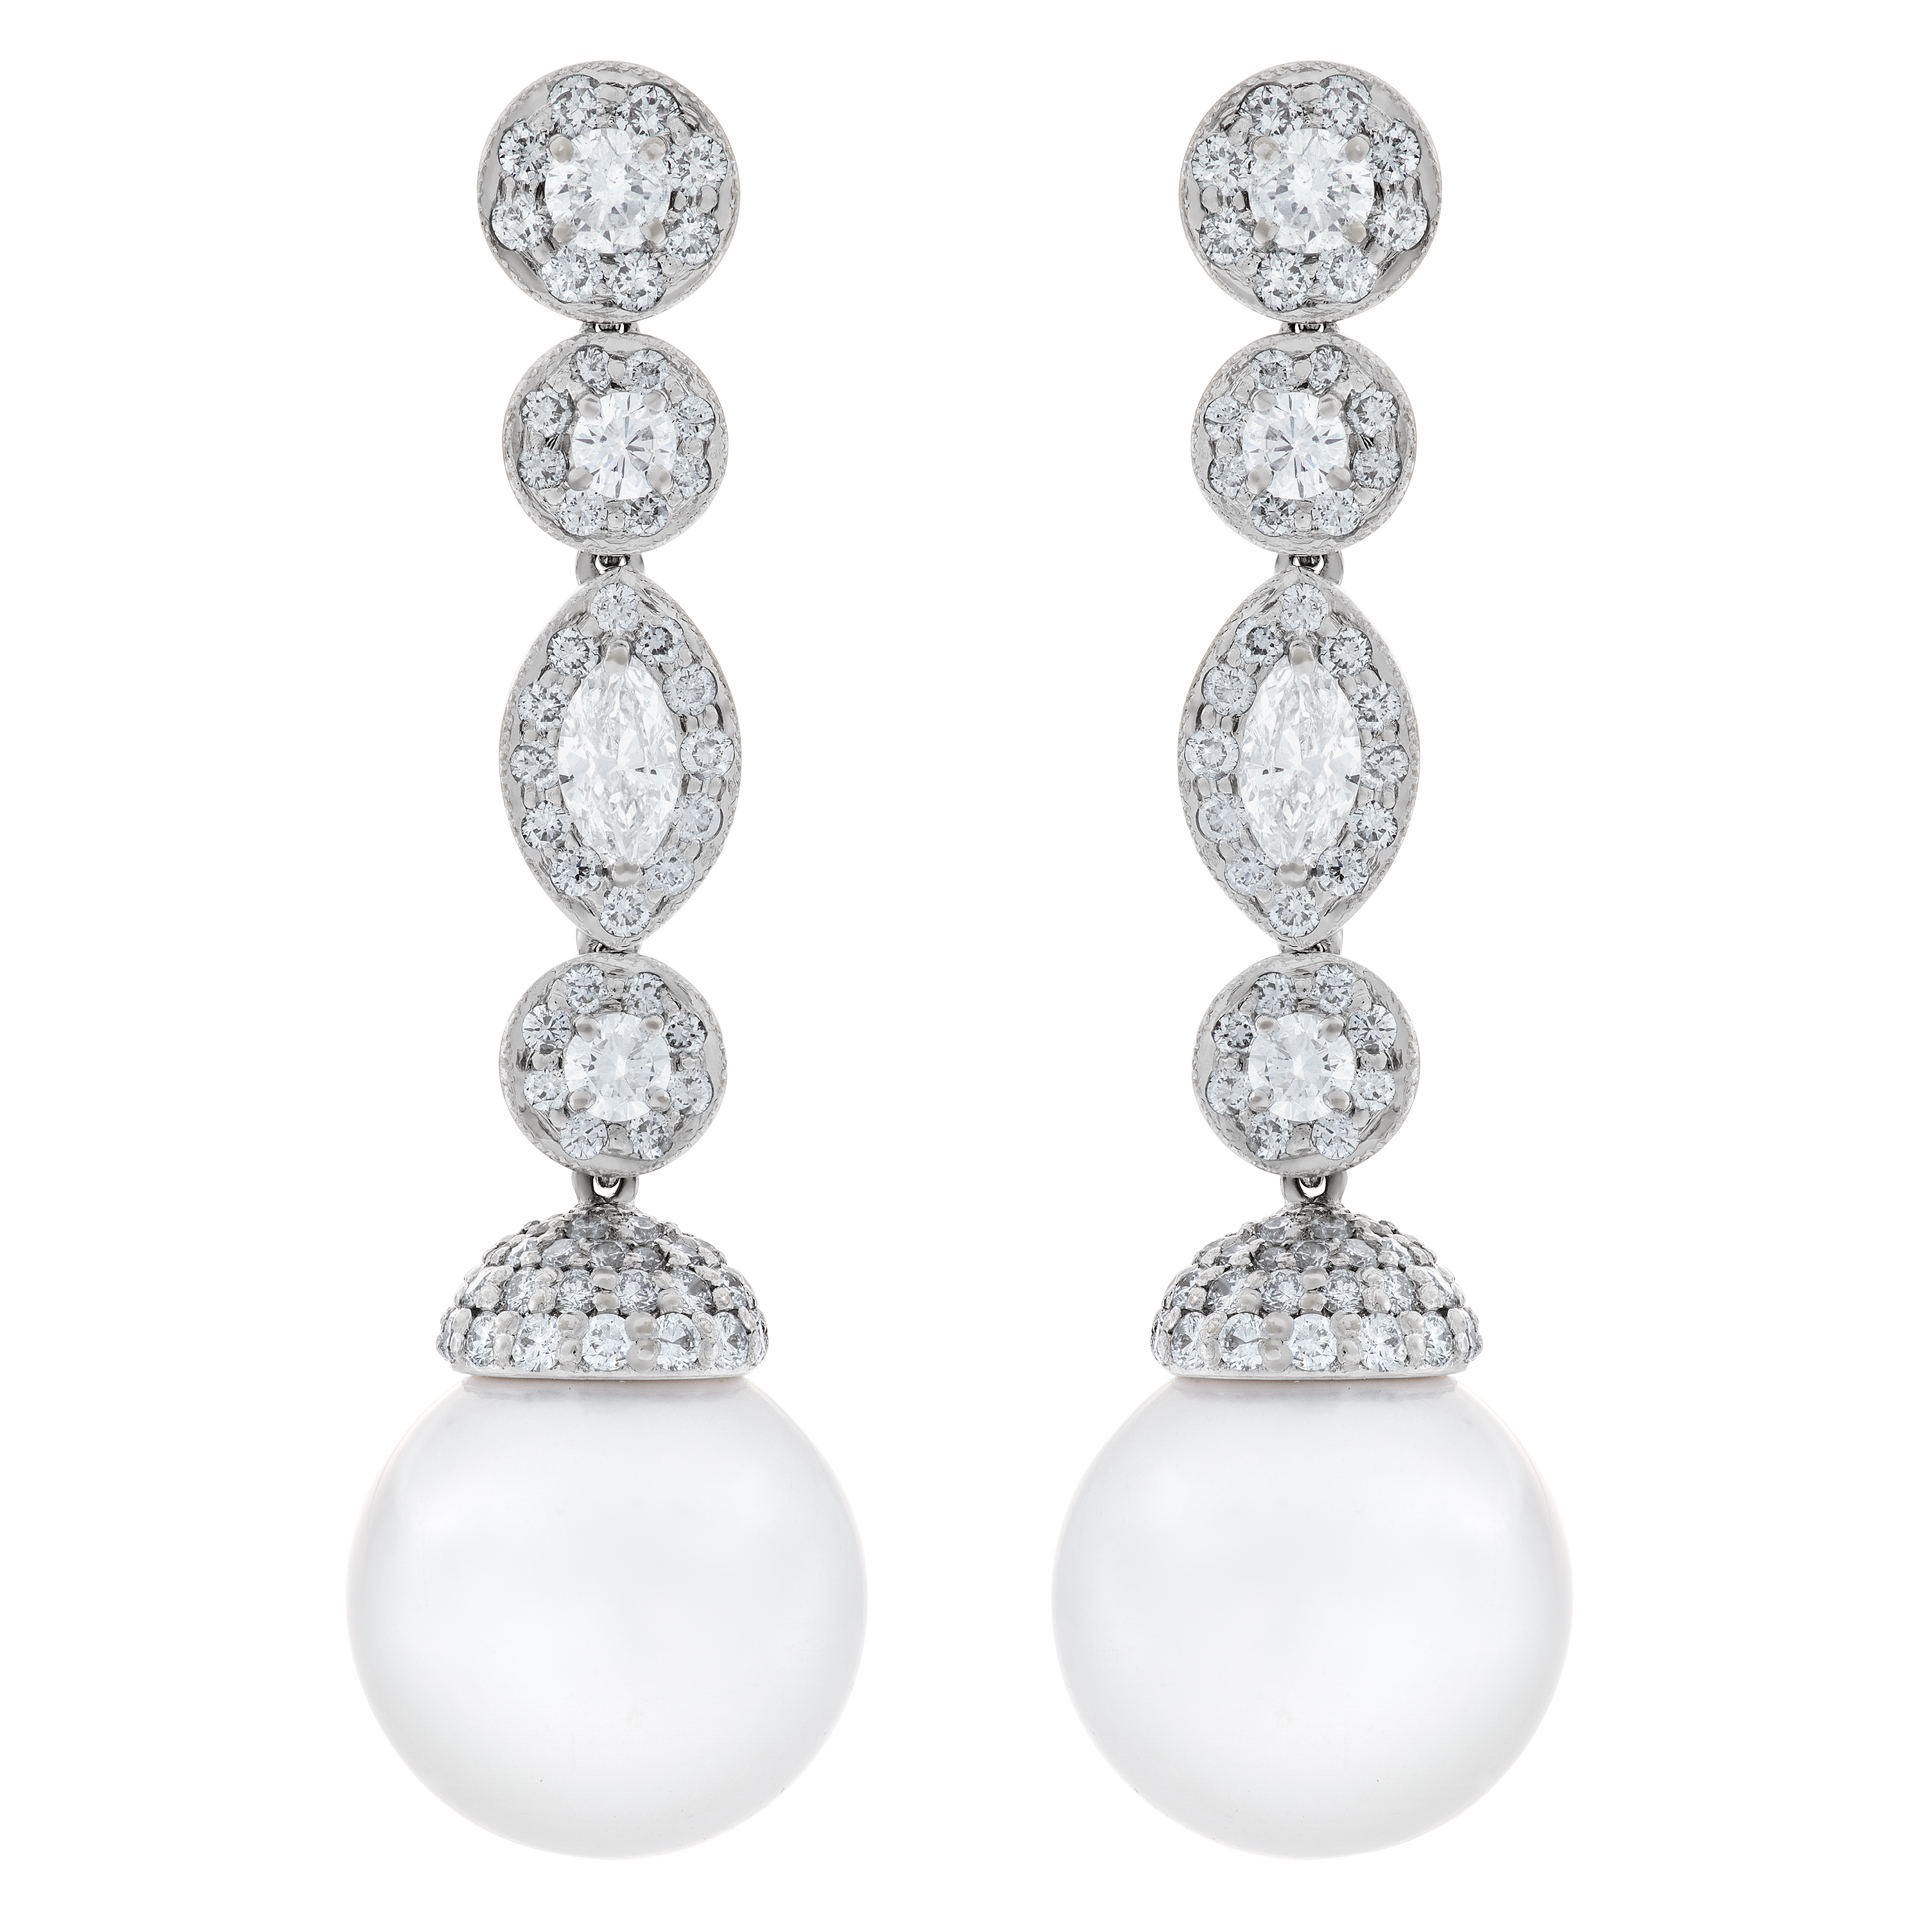 18k white gold pearl earrings with 3.65 carats in diamonds